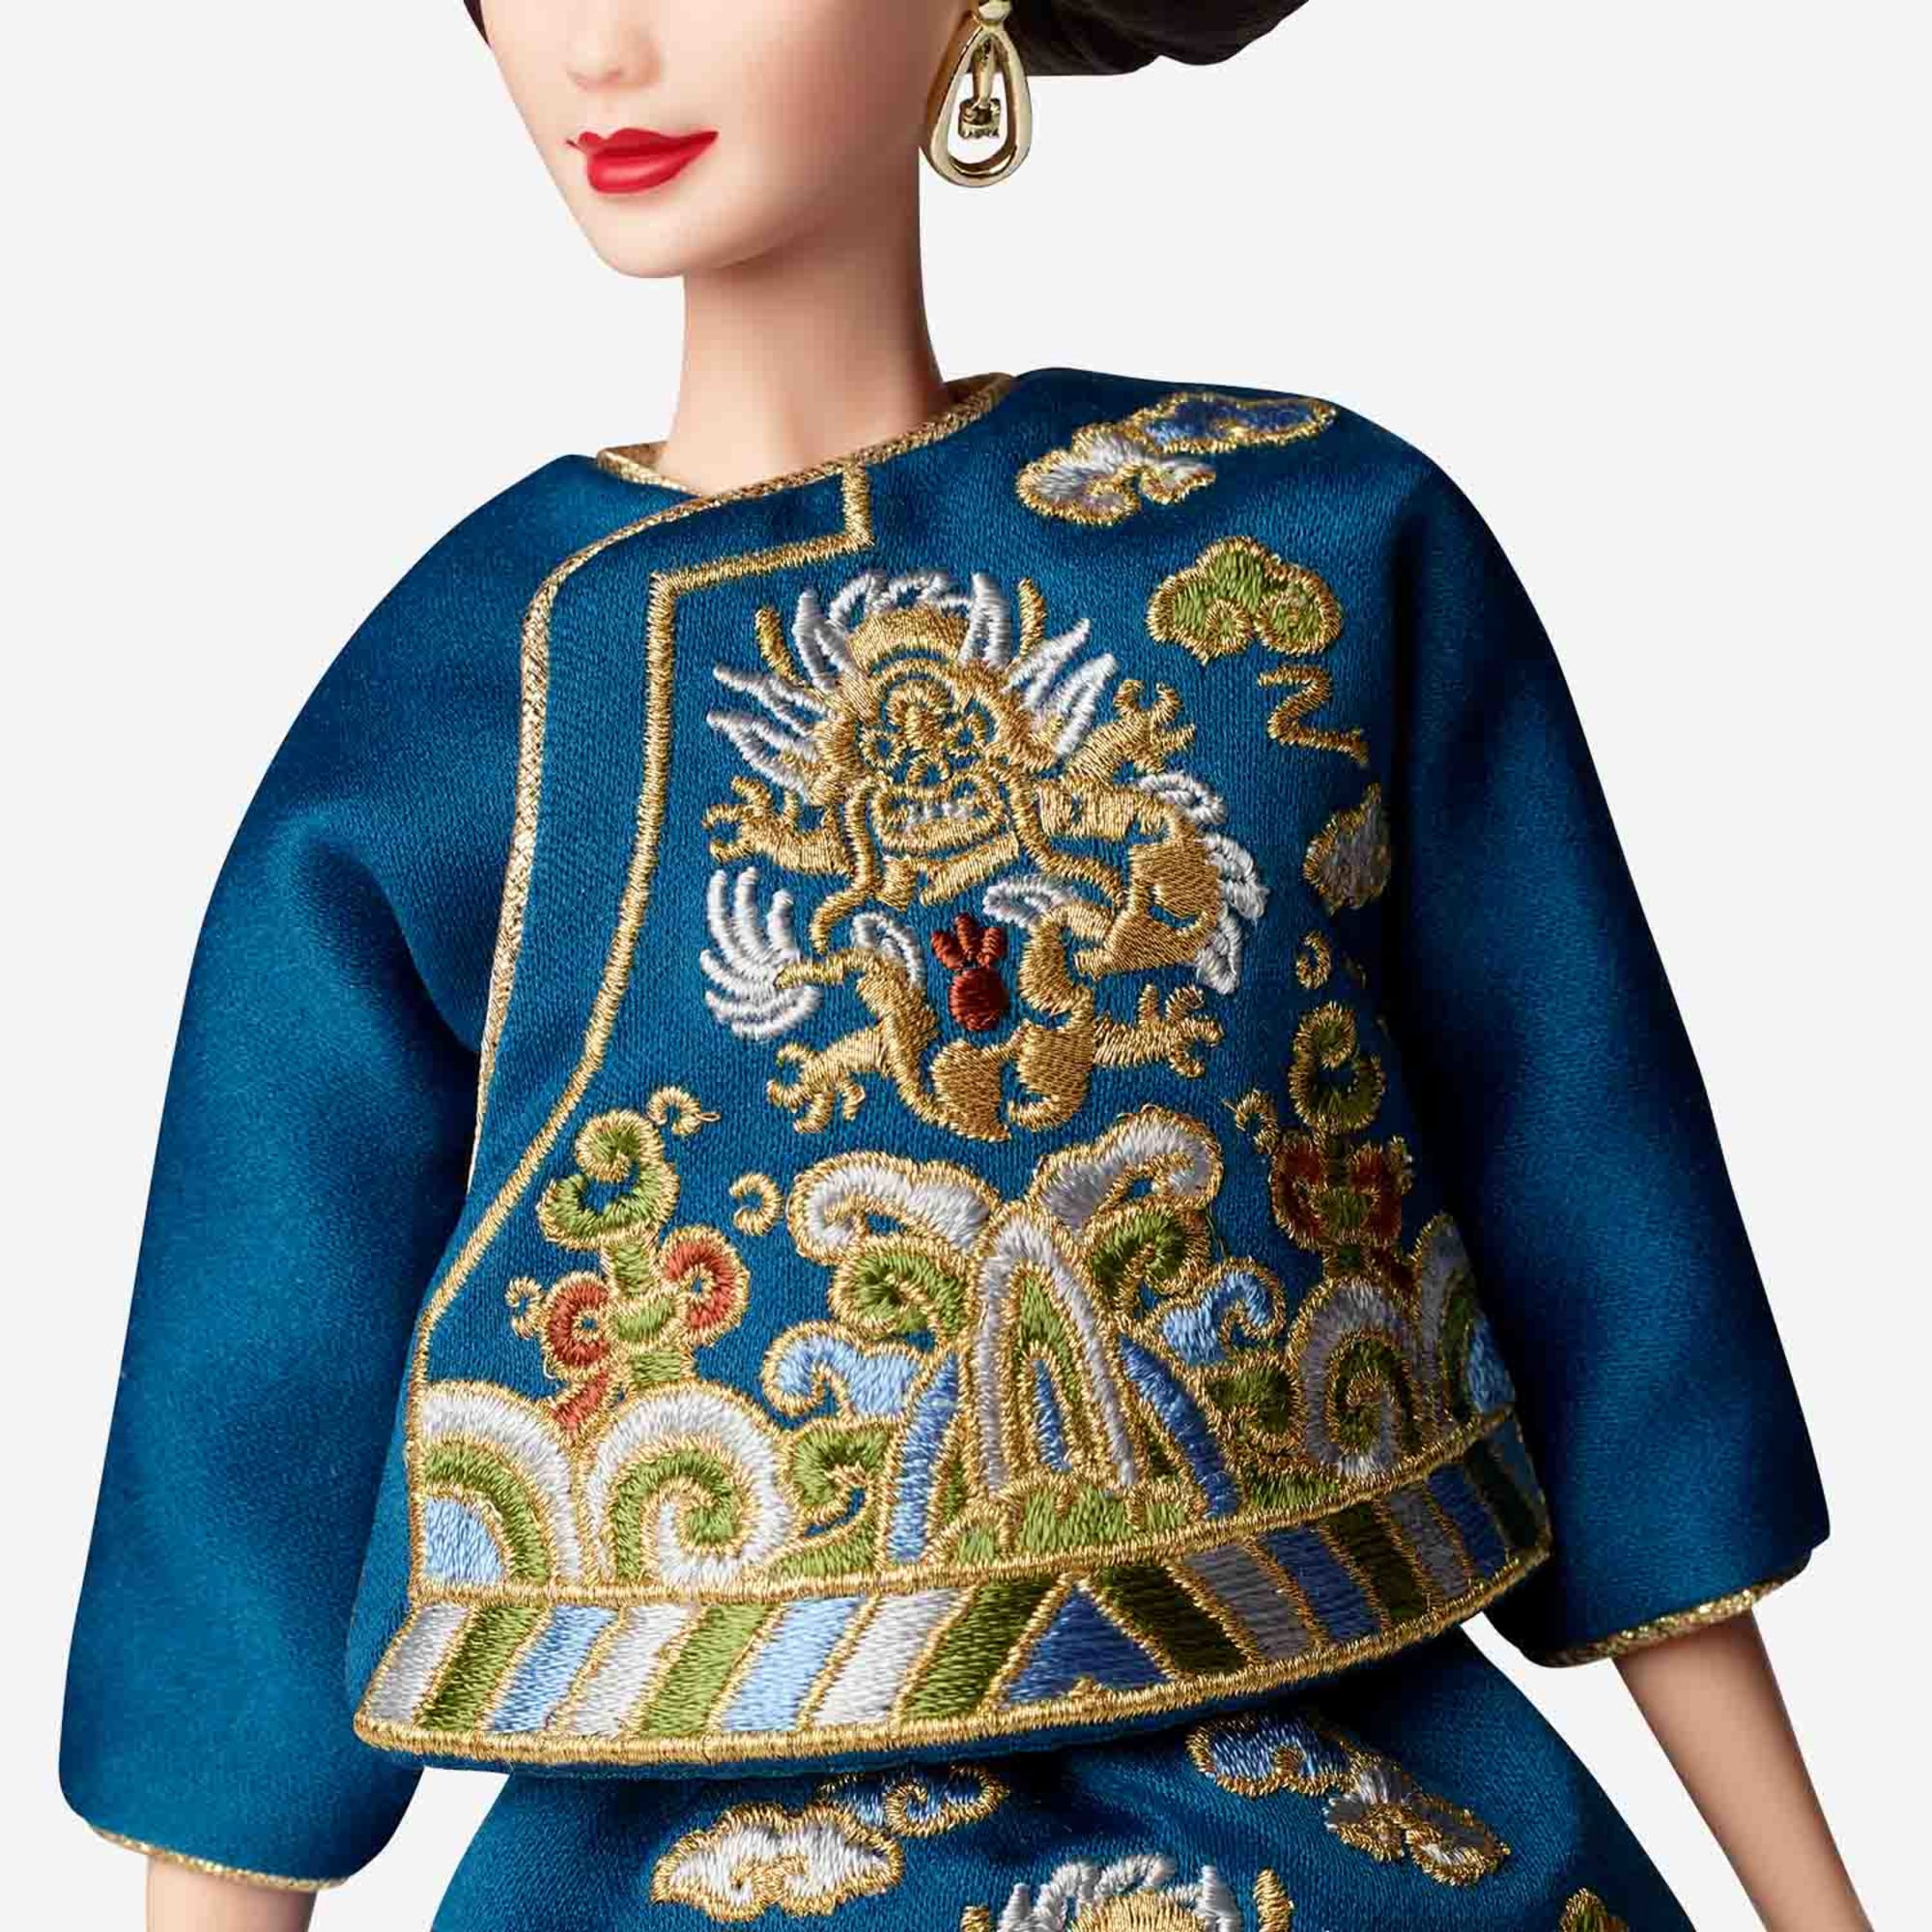 2023 Barbie Lunar New Year Doll Designed by Guo Pei